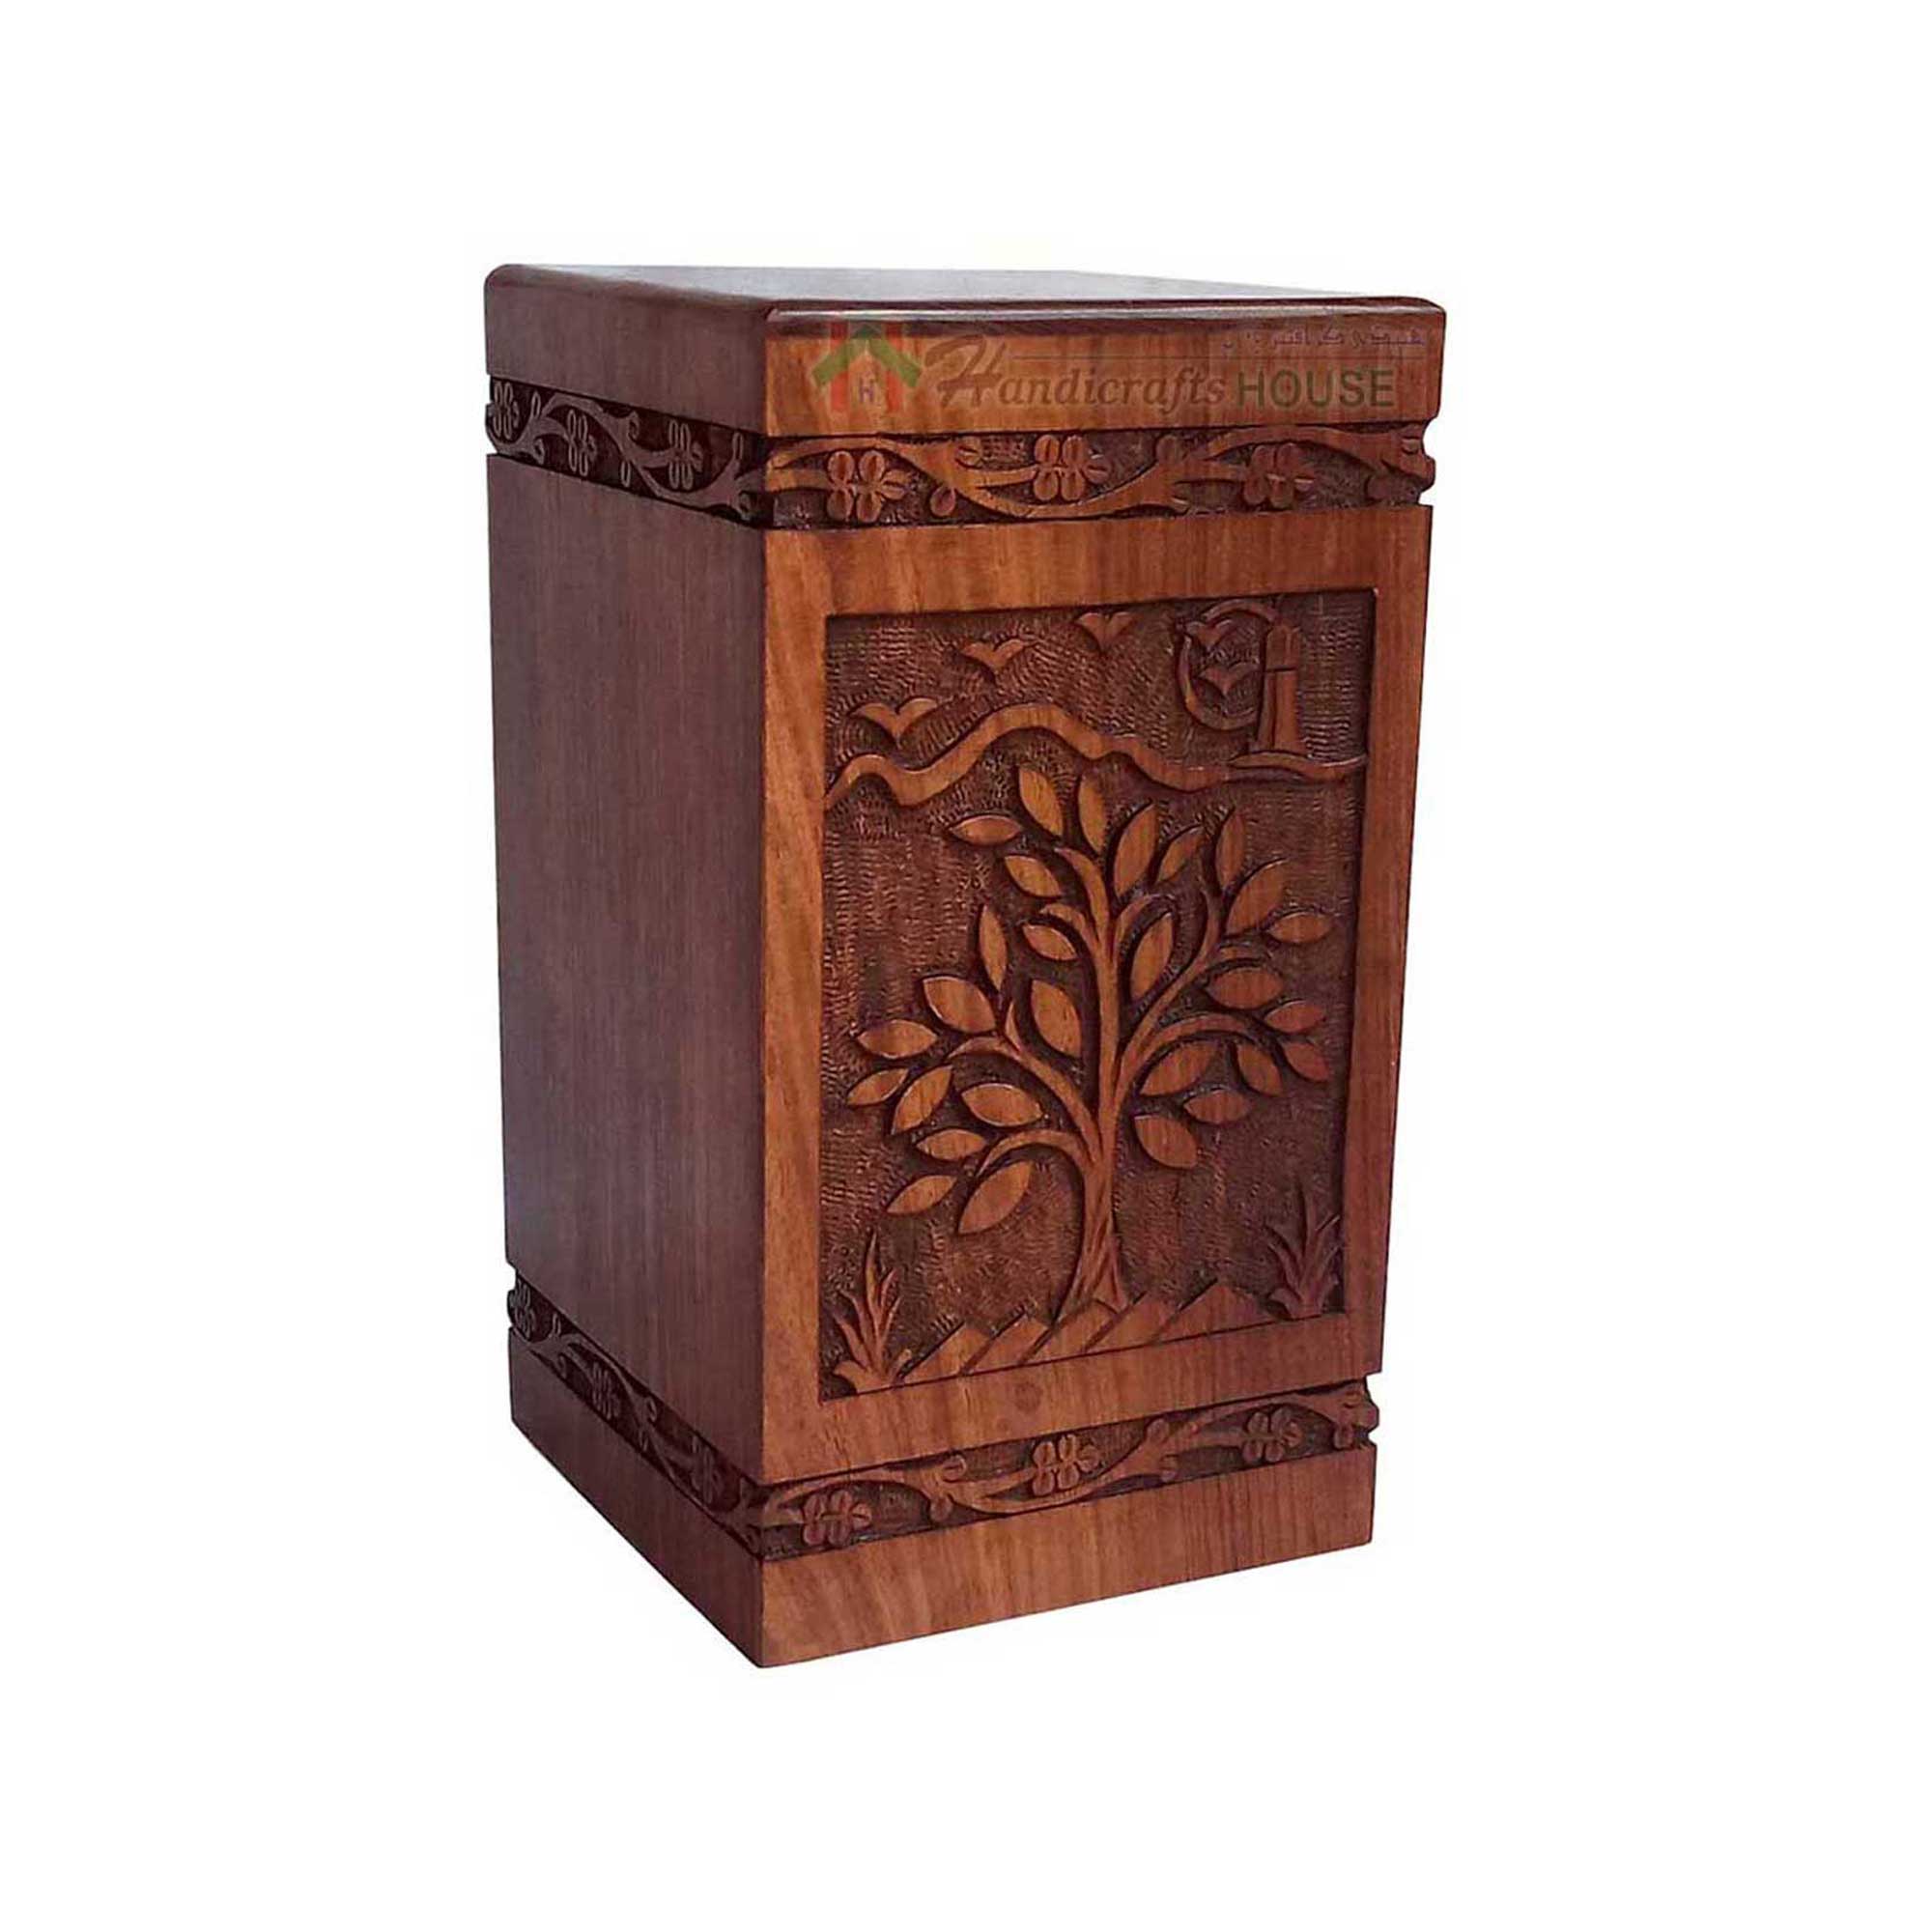 Wooden Urns For Human Ashes, Wood Cremation Urn, Decorative Casket Boxes, Memorials Box